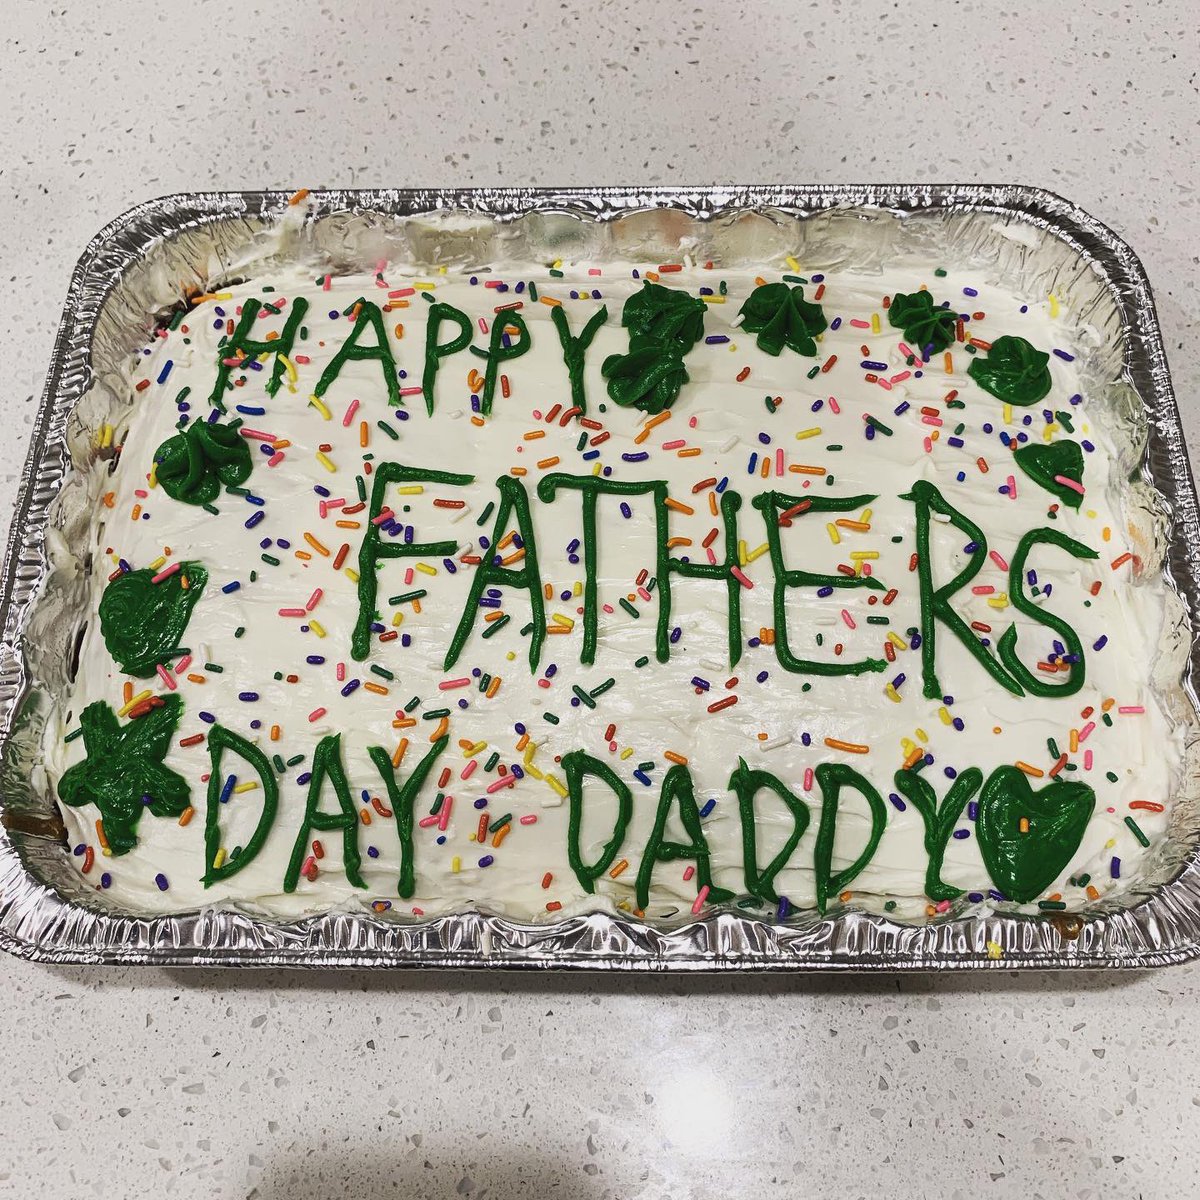 Fantastic Father’s Day surprise to me! I wouldn’t trade this for the world! Yes a week late due to a trip but still fantastic. 🥰🥰❤️
#TexasAgent
#fathersday  #fathersdaygifts 
#youAREtheFather